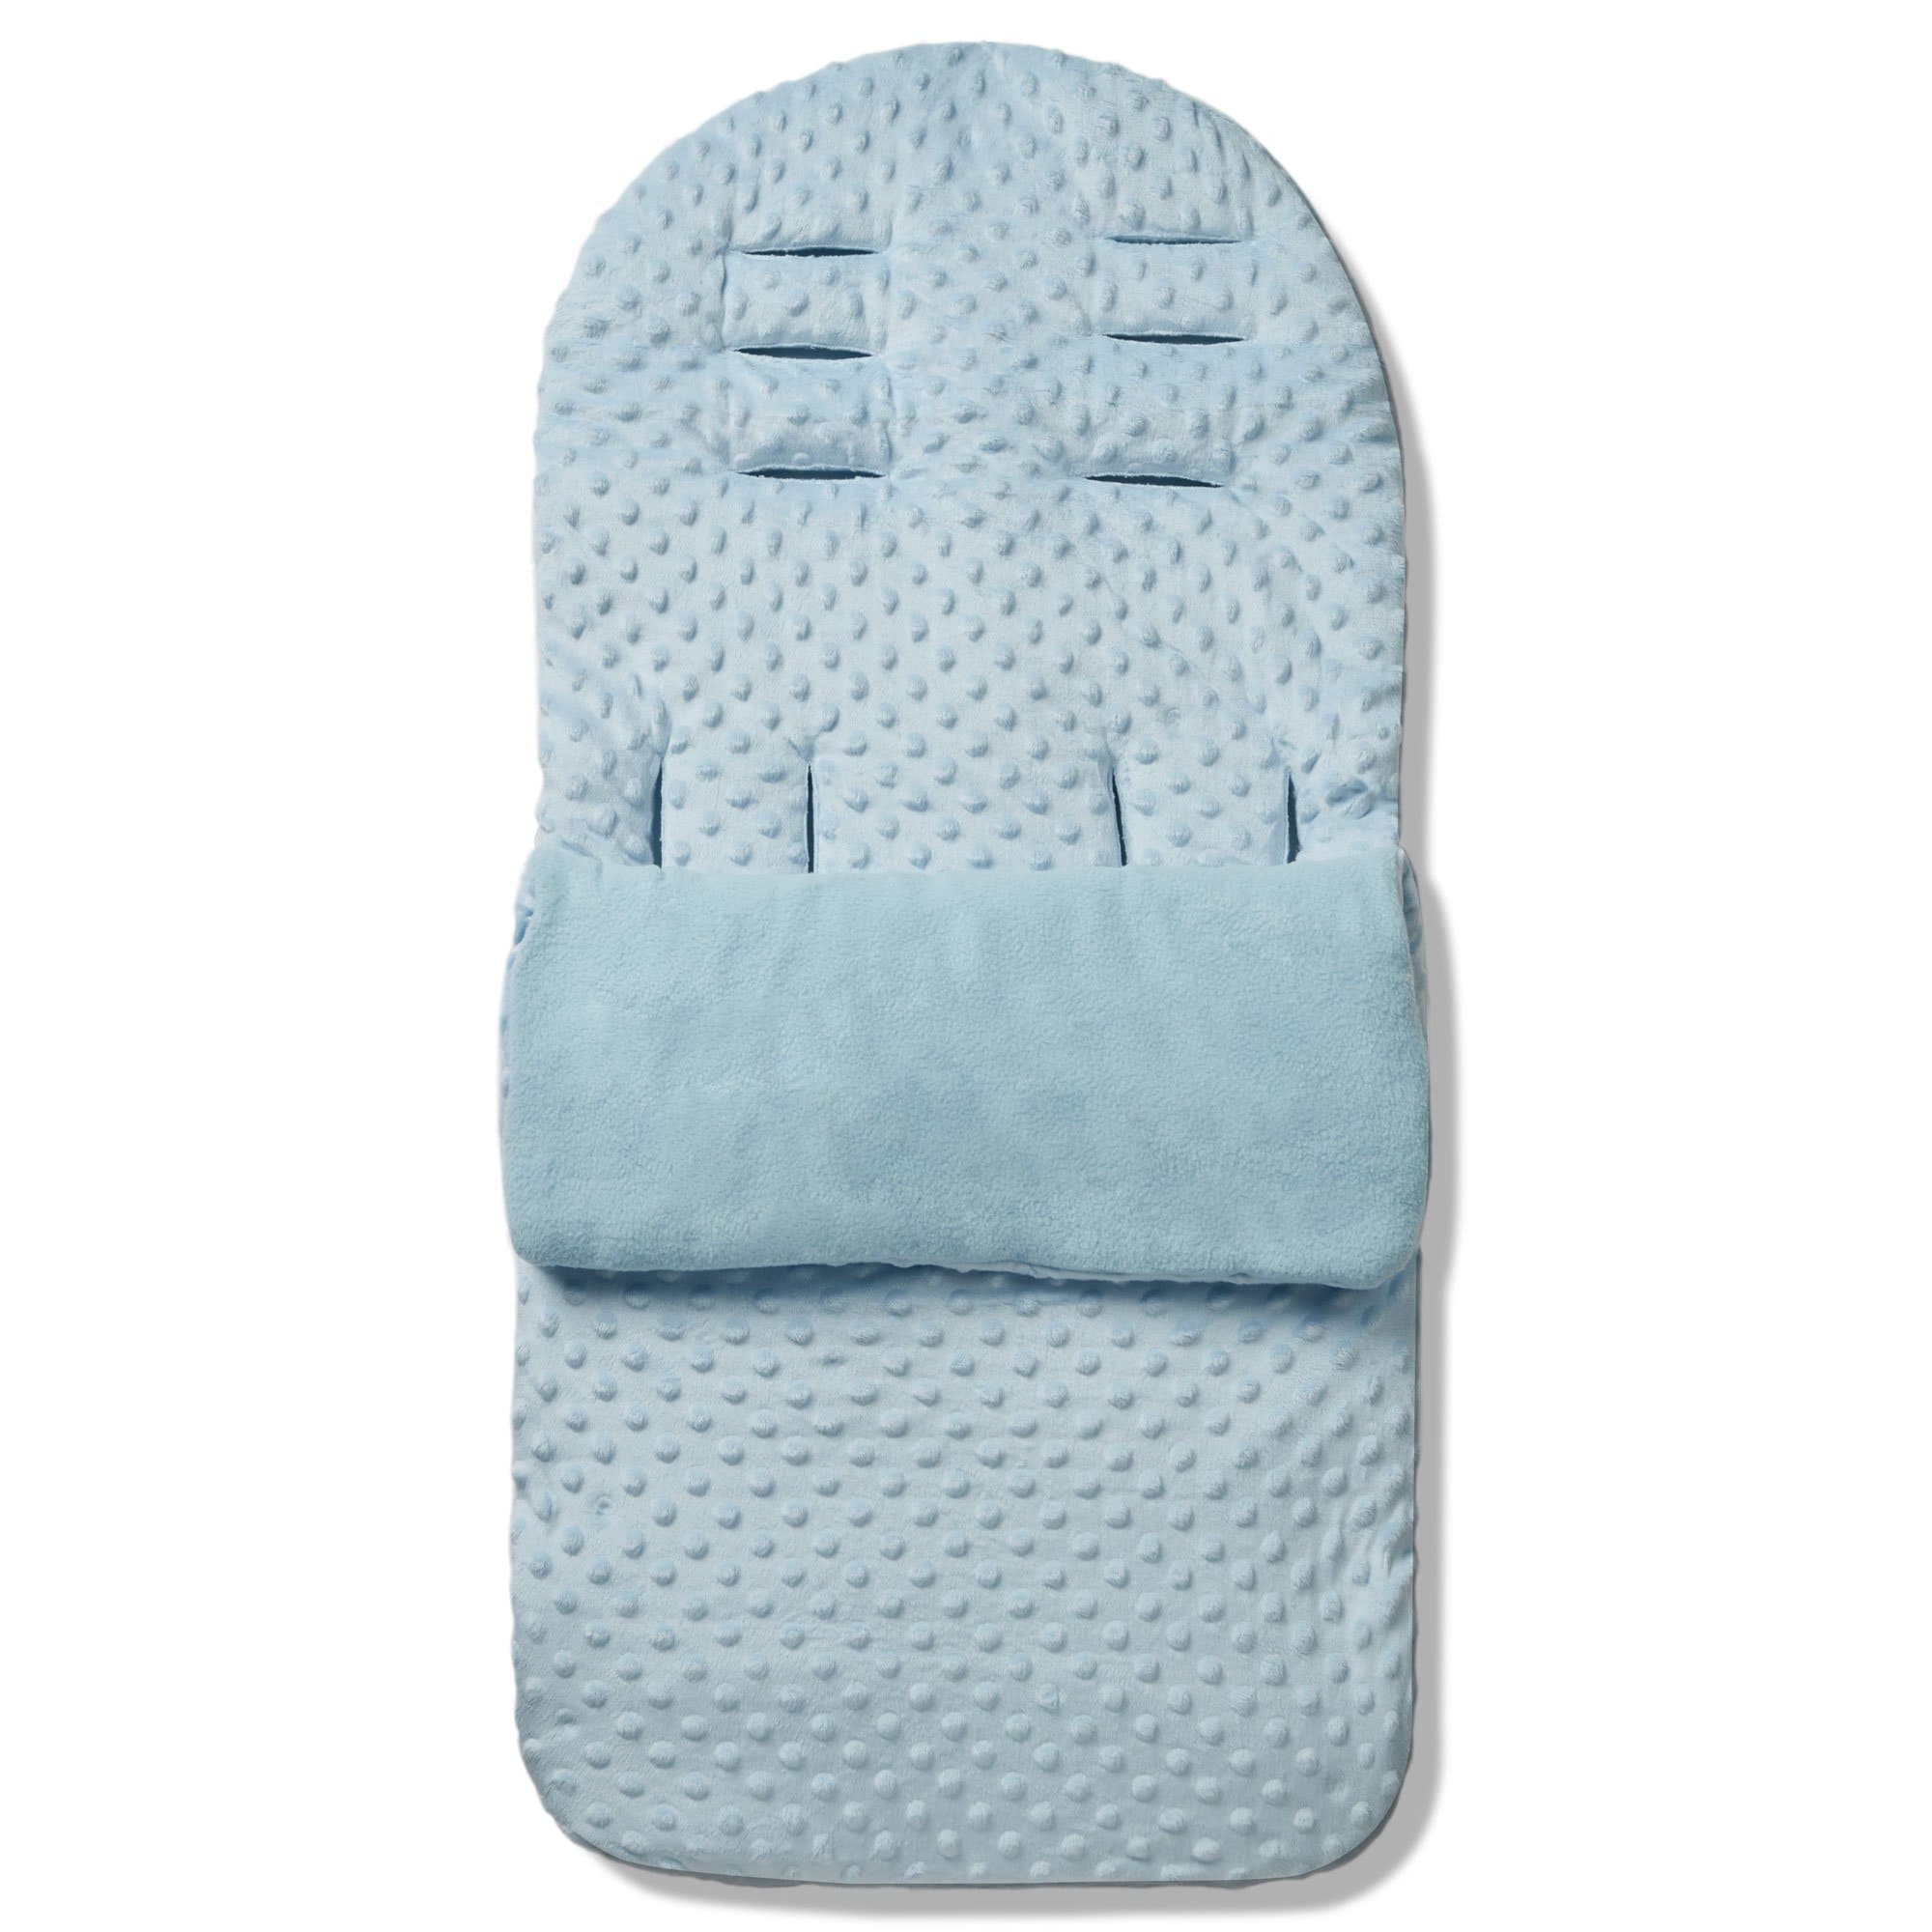 Dimple Footmuff / Cosy Toes Compatible with BabyDan - Blue / Fits All Models | For Your Little One